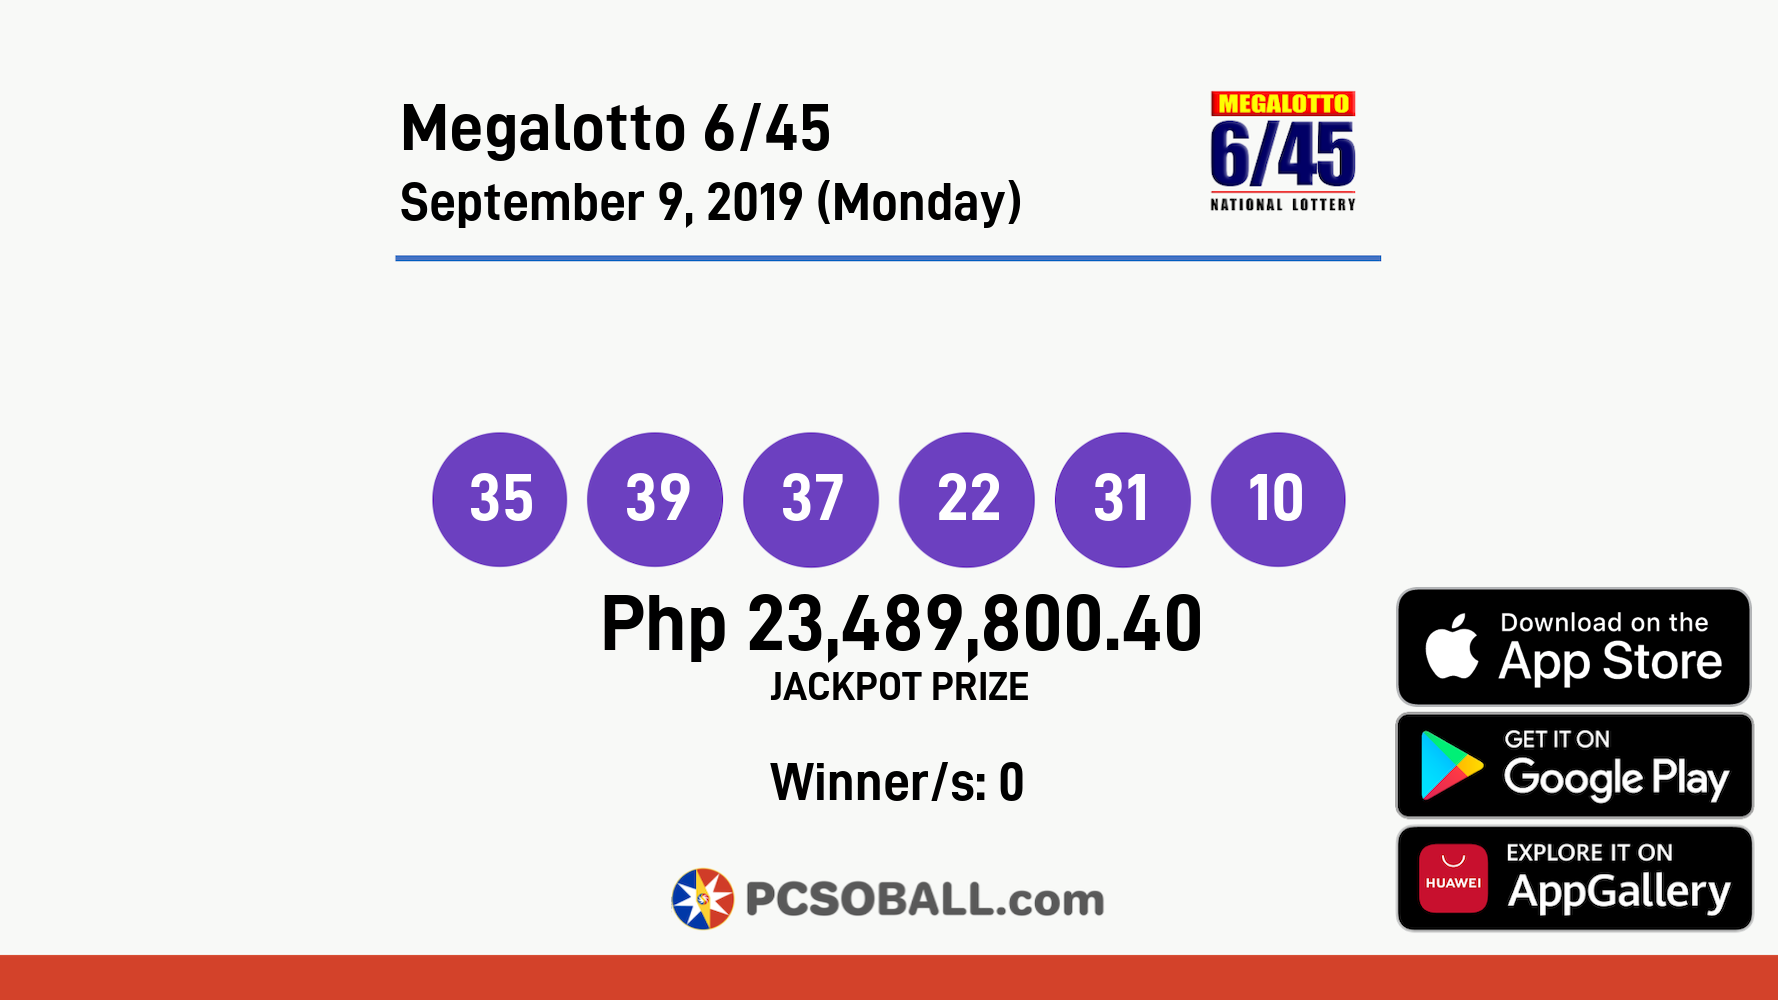 Megalotto 6/45 September 9, 2019 (Monday) Result